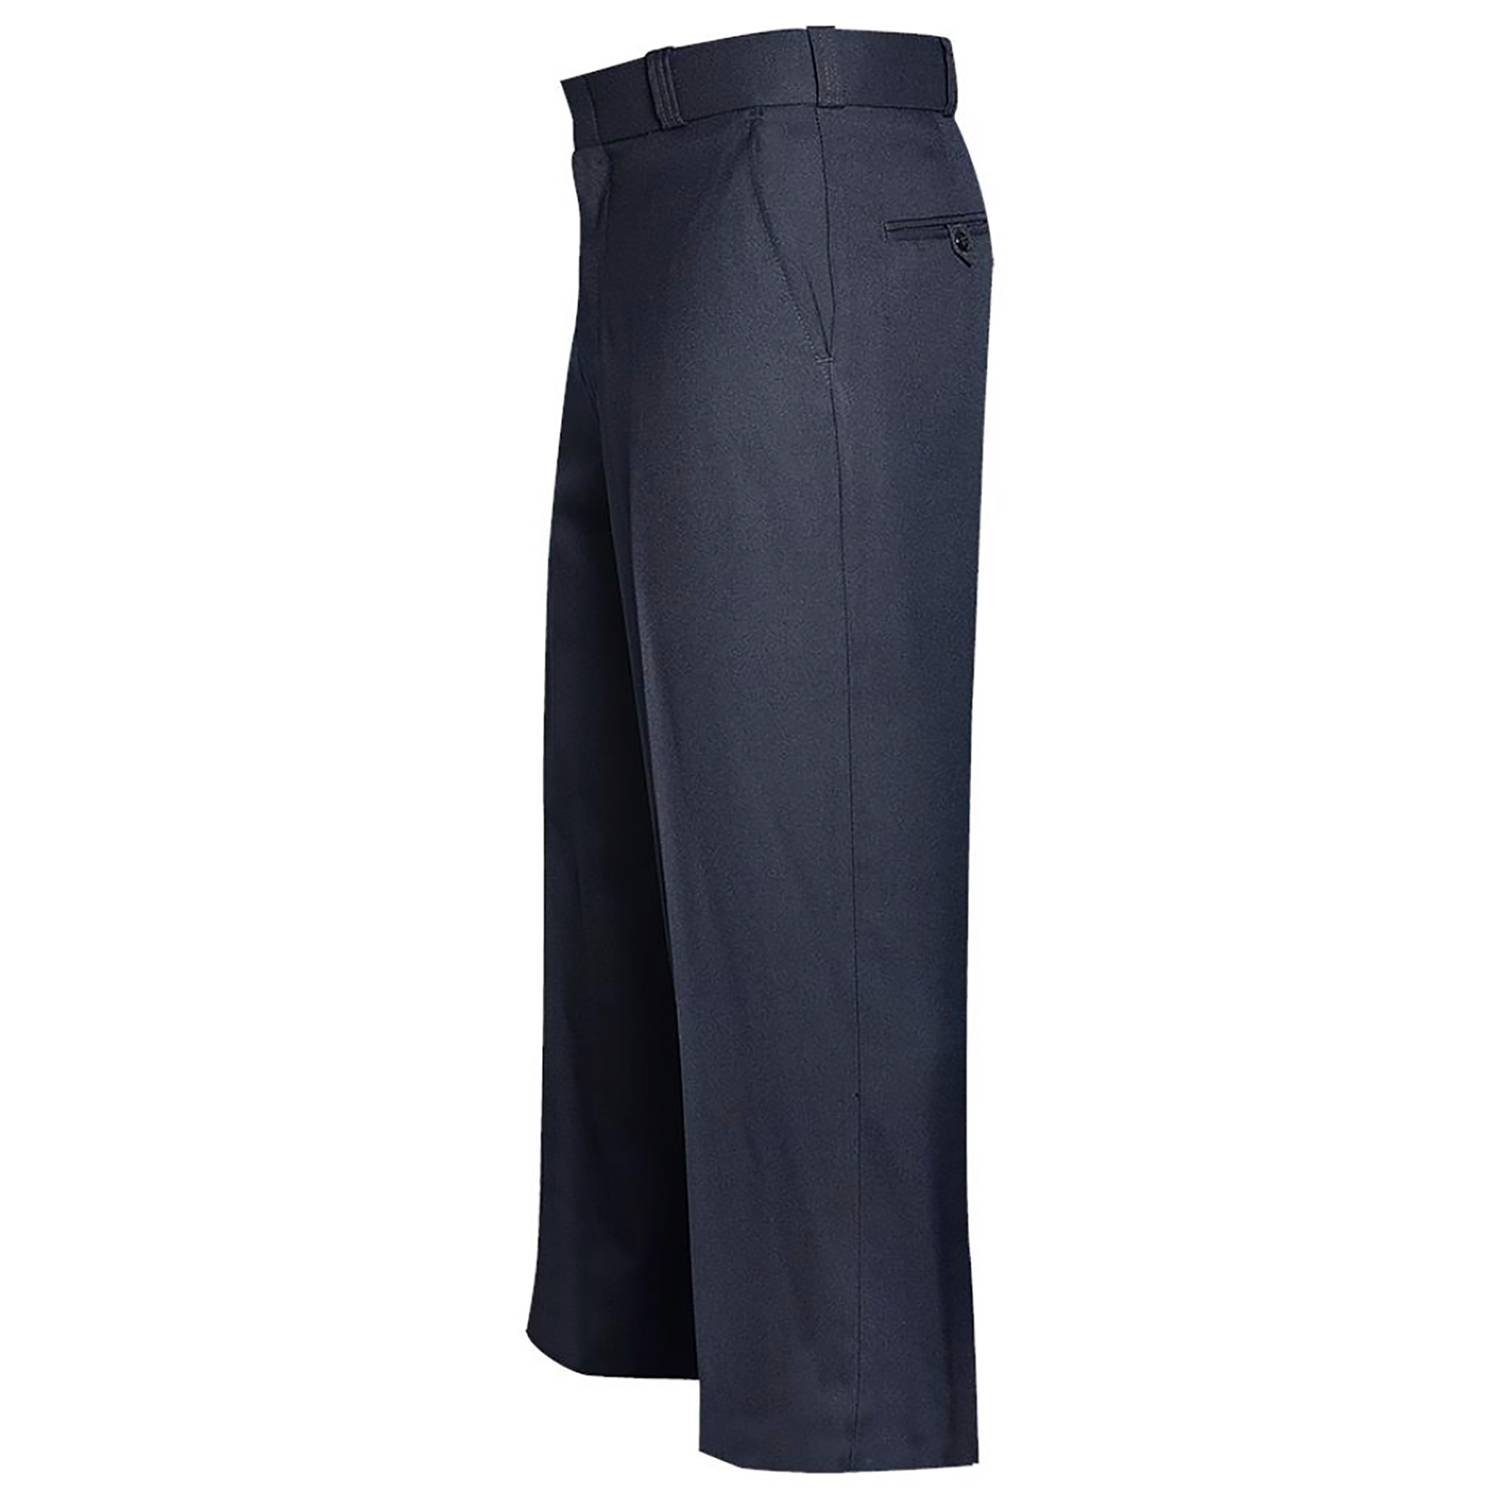 Flying Cross NFPA Compliant Synergy Nomex Pants